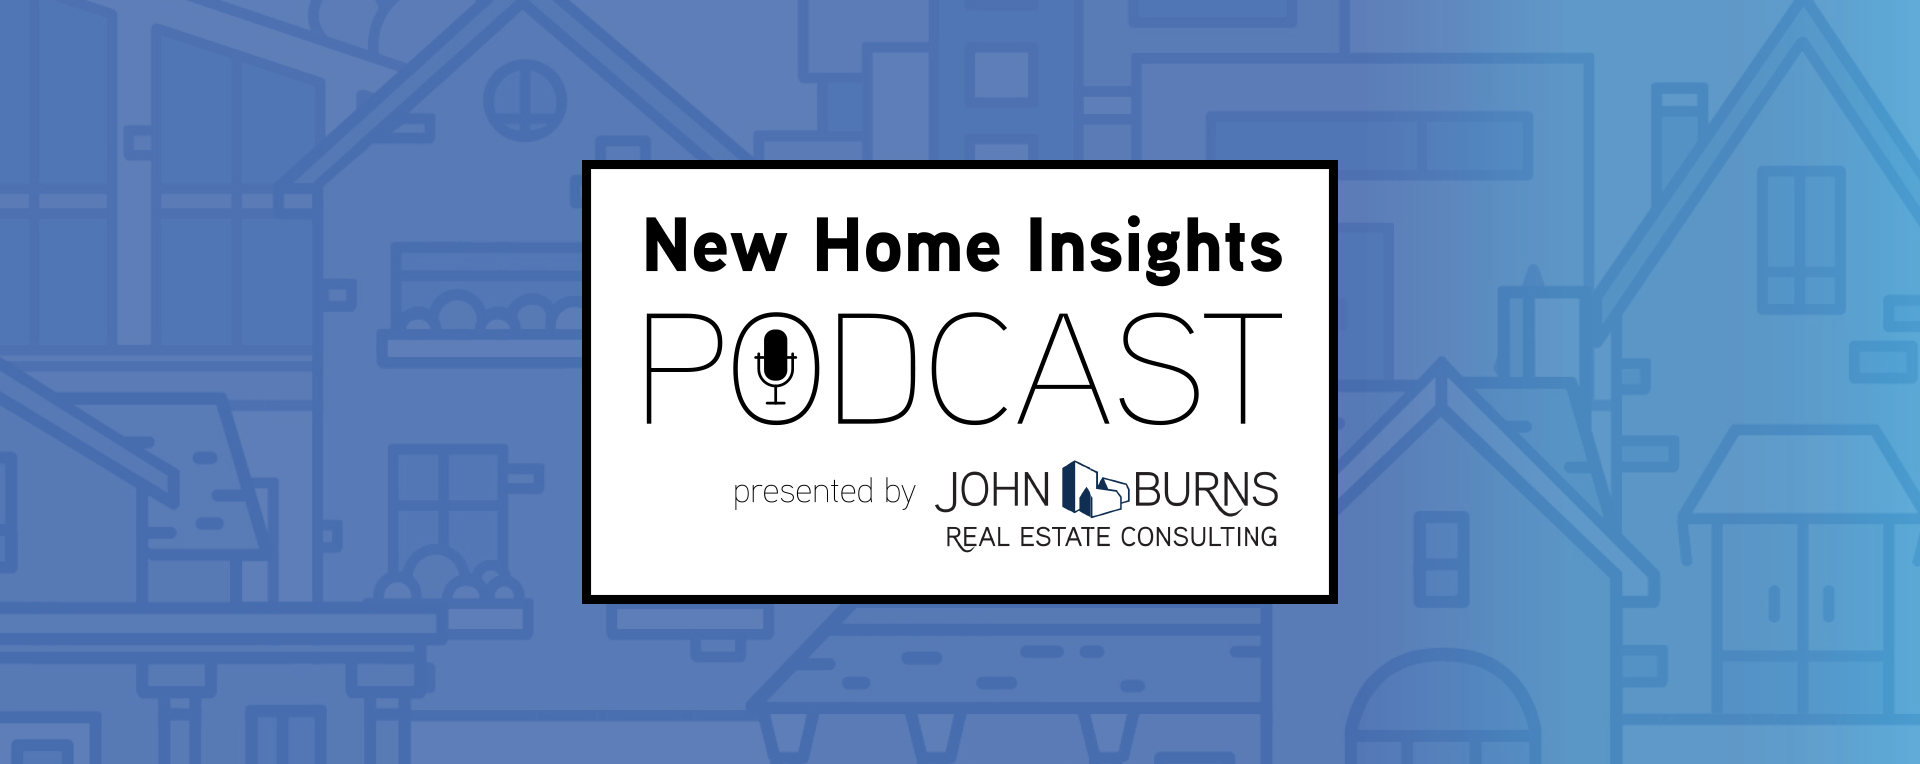 new home insights podcast masterplans newland communities